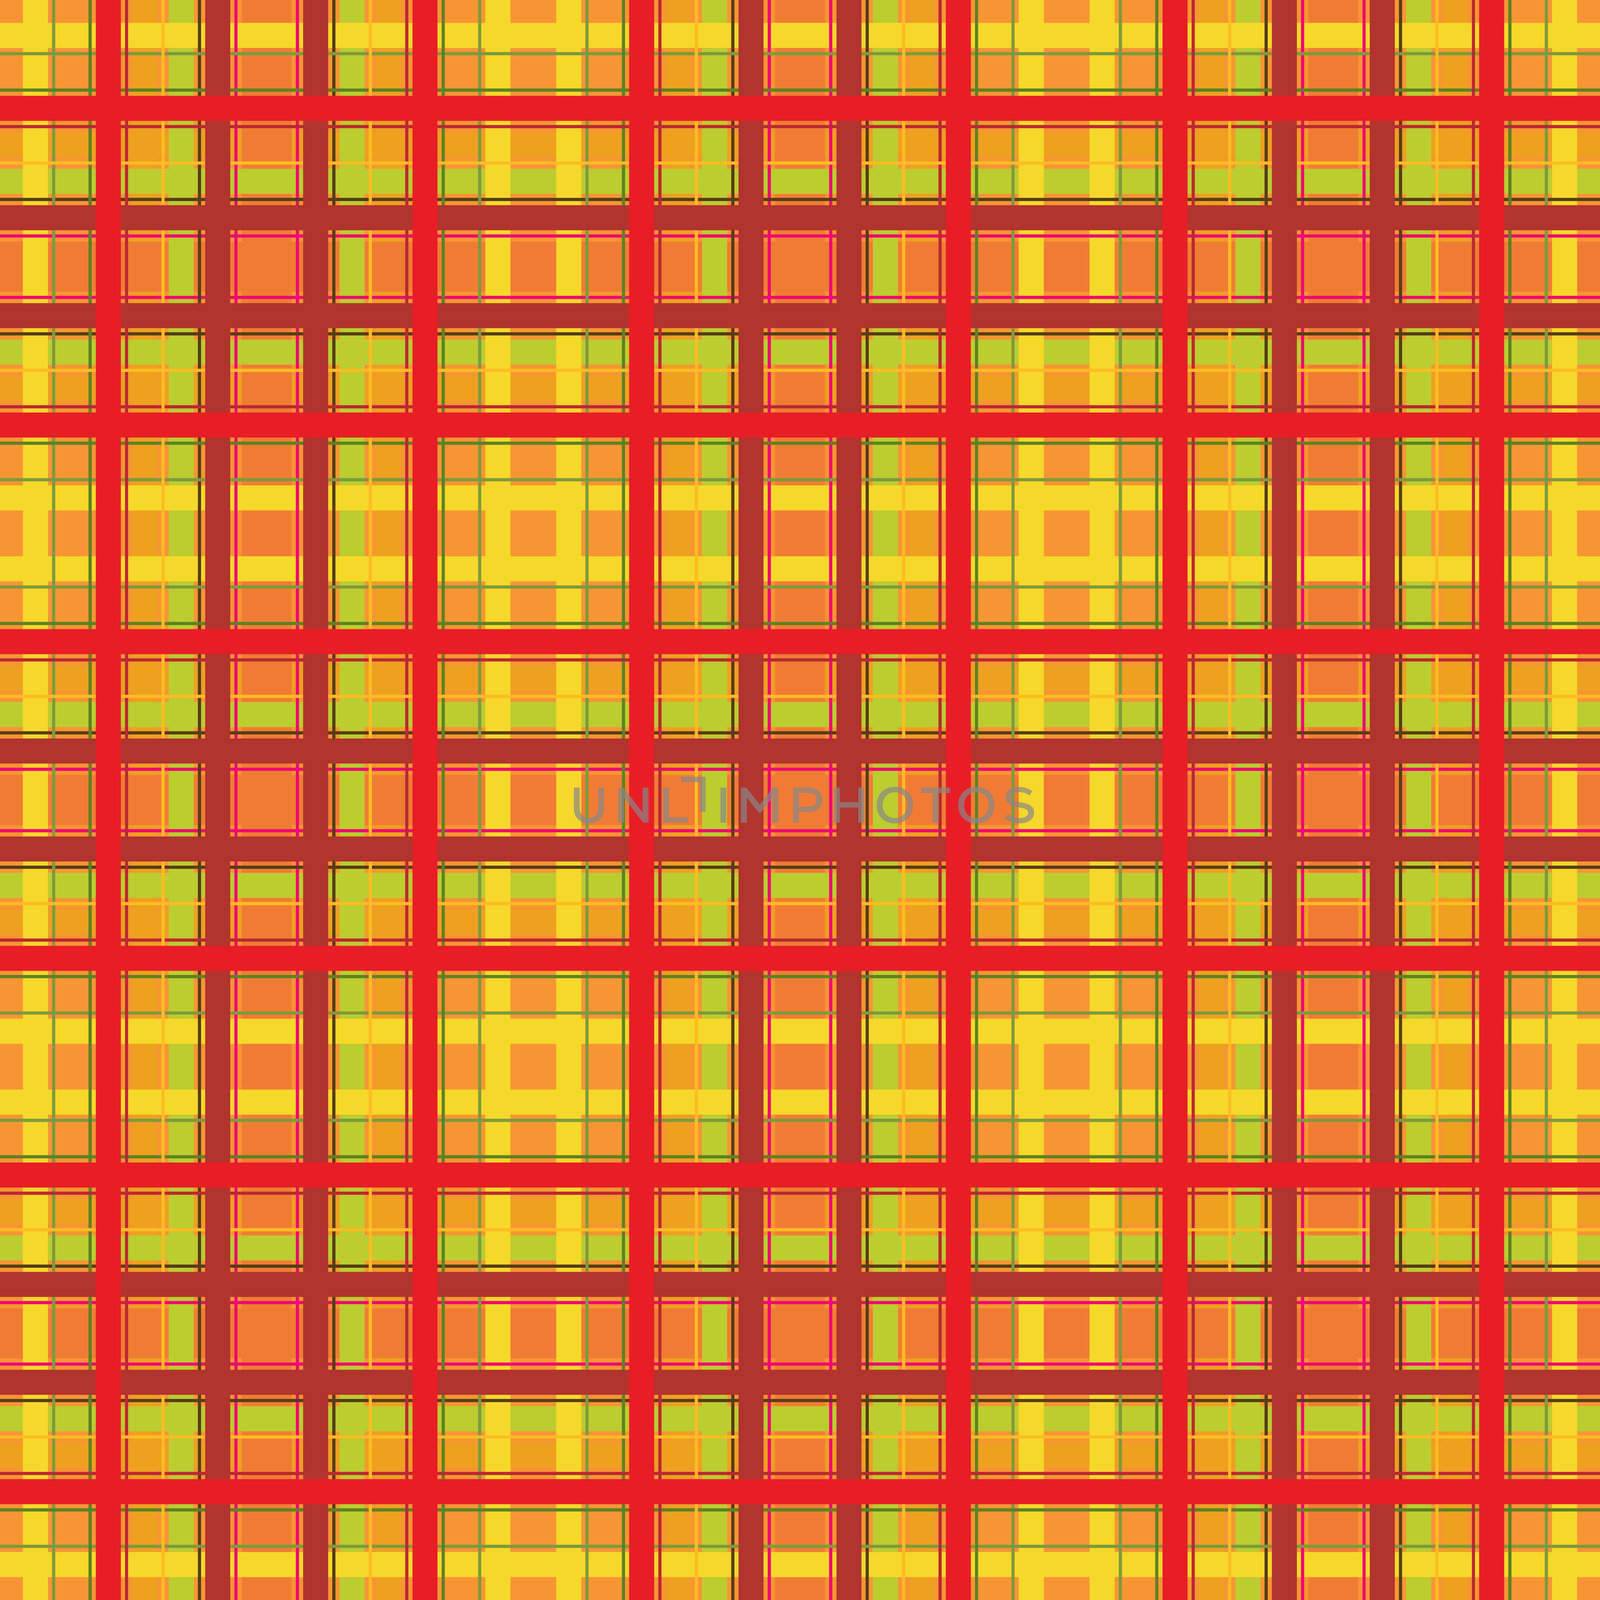 Warm colored seamless stitch pattern for wallpaper or tablecloth backgrounds